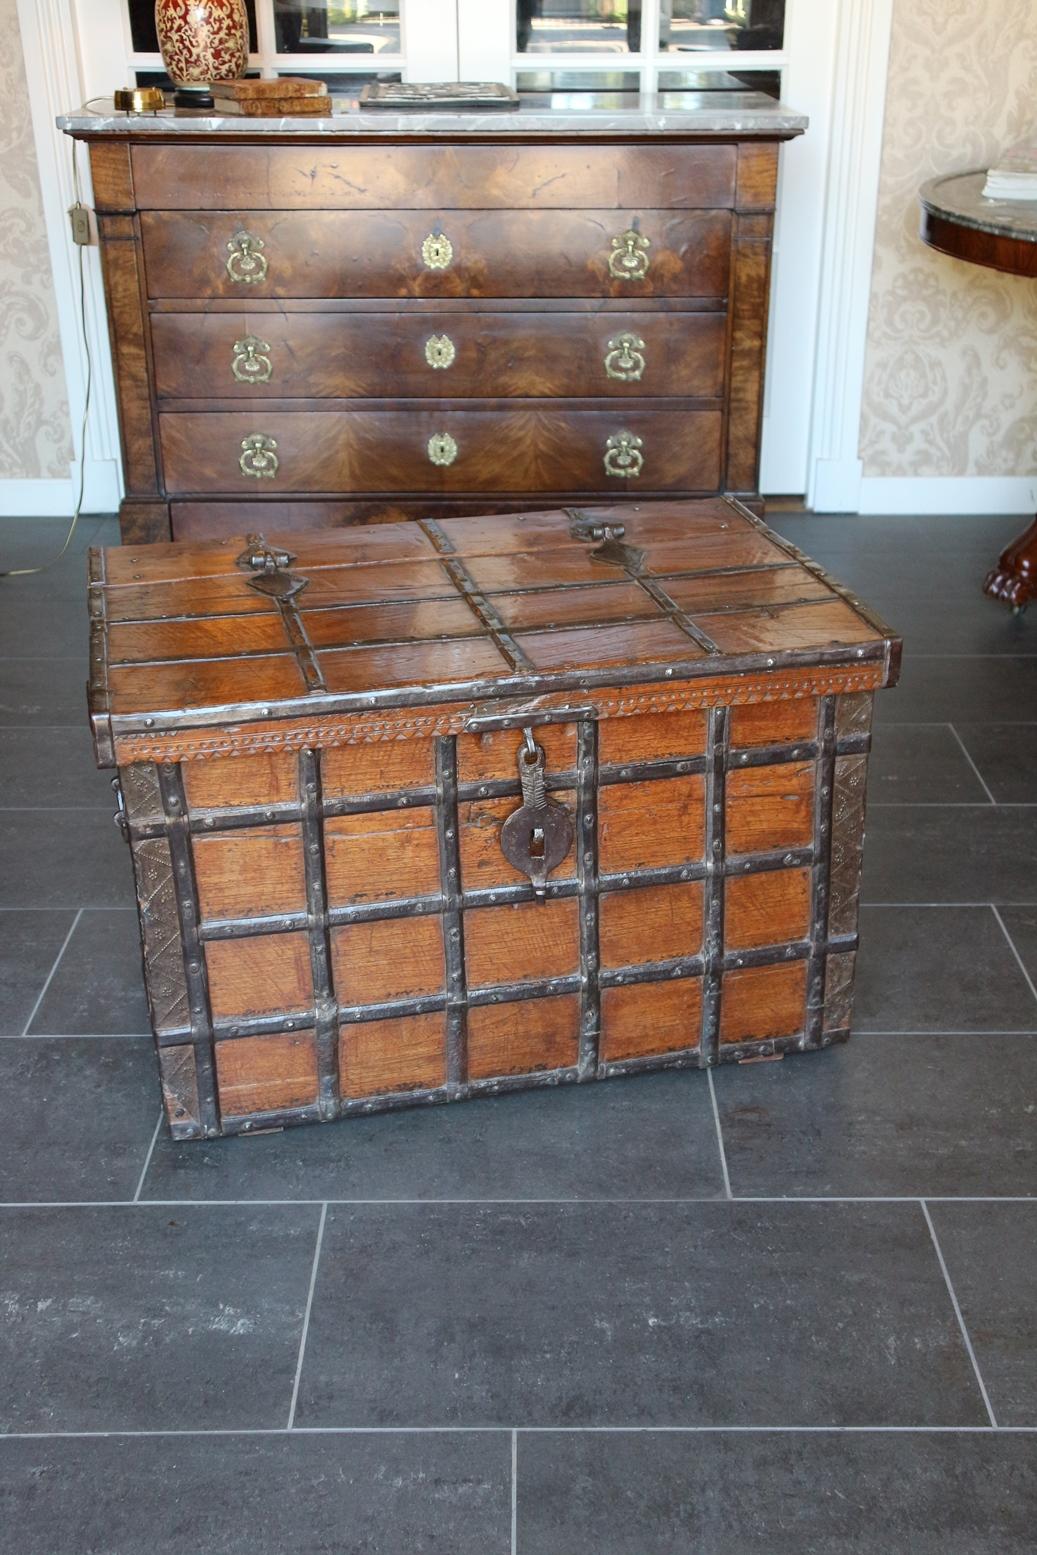 Small teak chest. Aged appearance and warm color. In perfect state. Good to use as a small coffee table or side table next to chair or sofa.

Origin: Anglo-Indian

Period: circa 1860.
Measures: W 80cm, D 54cm, H 51cm.